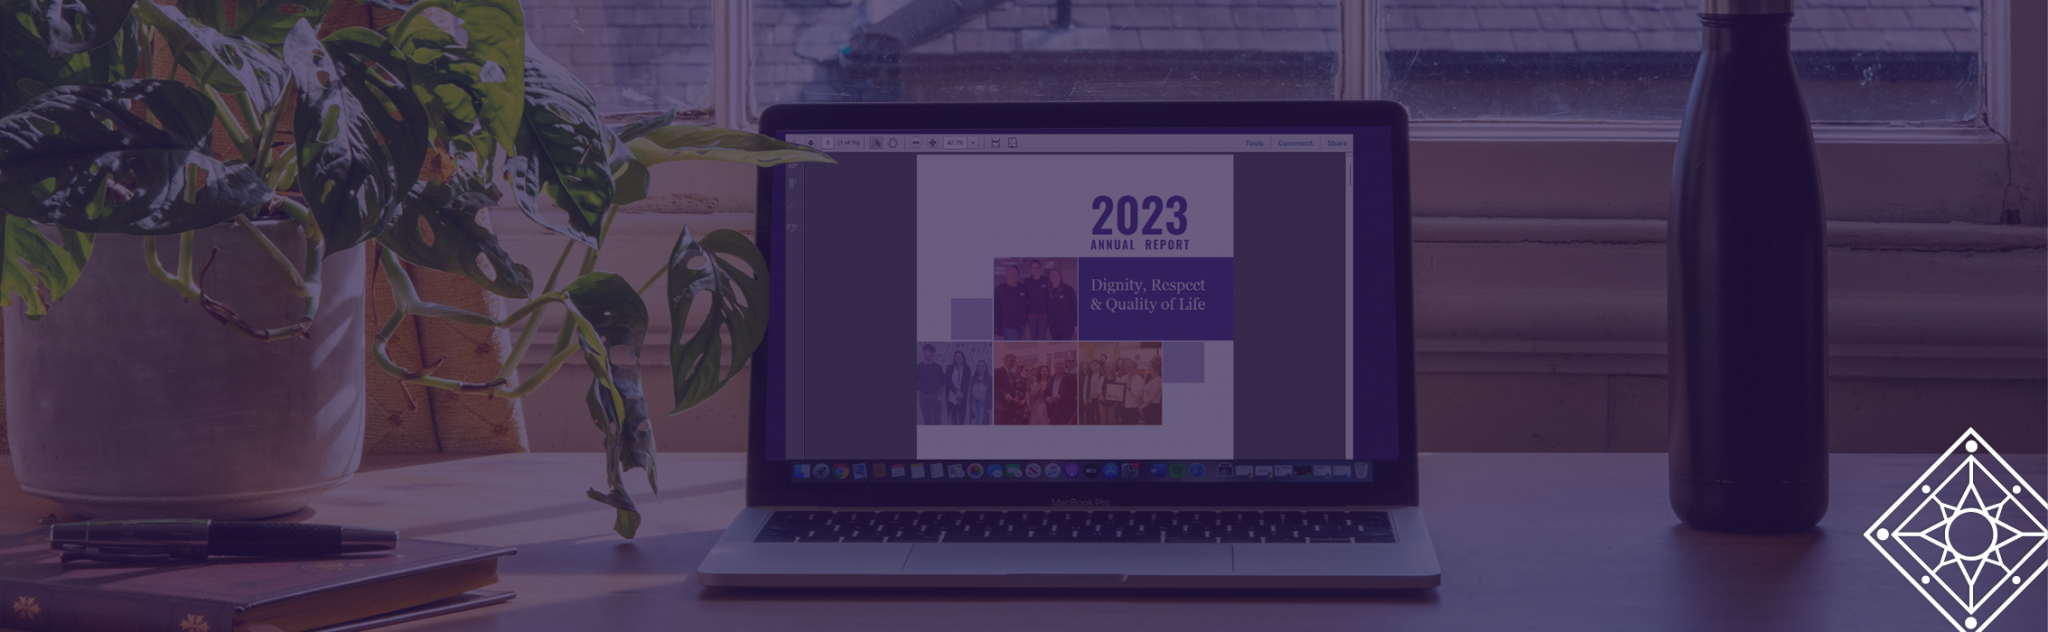 Laptop sits open on a desk, with the cover page of the 2023 Annual Report open on screen.